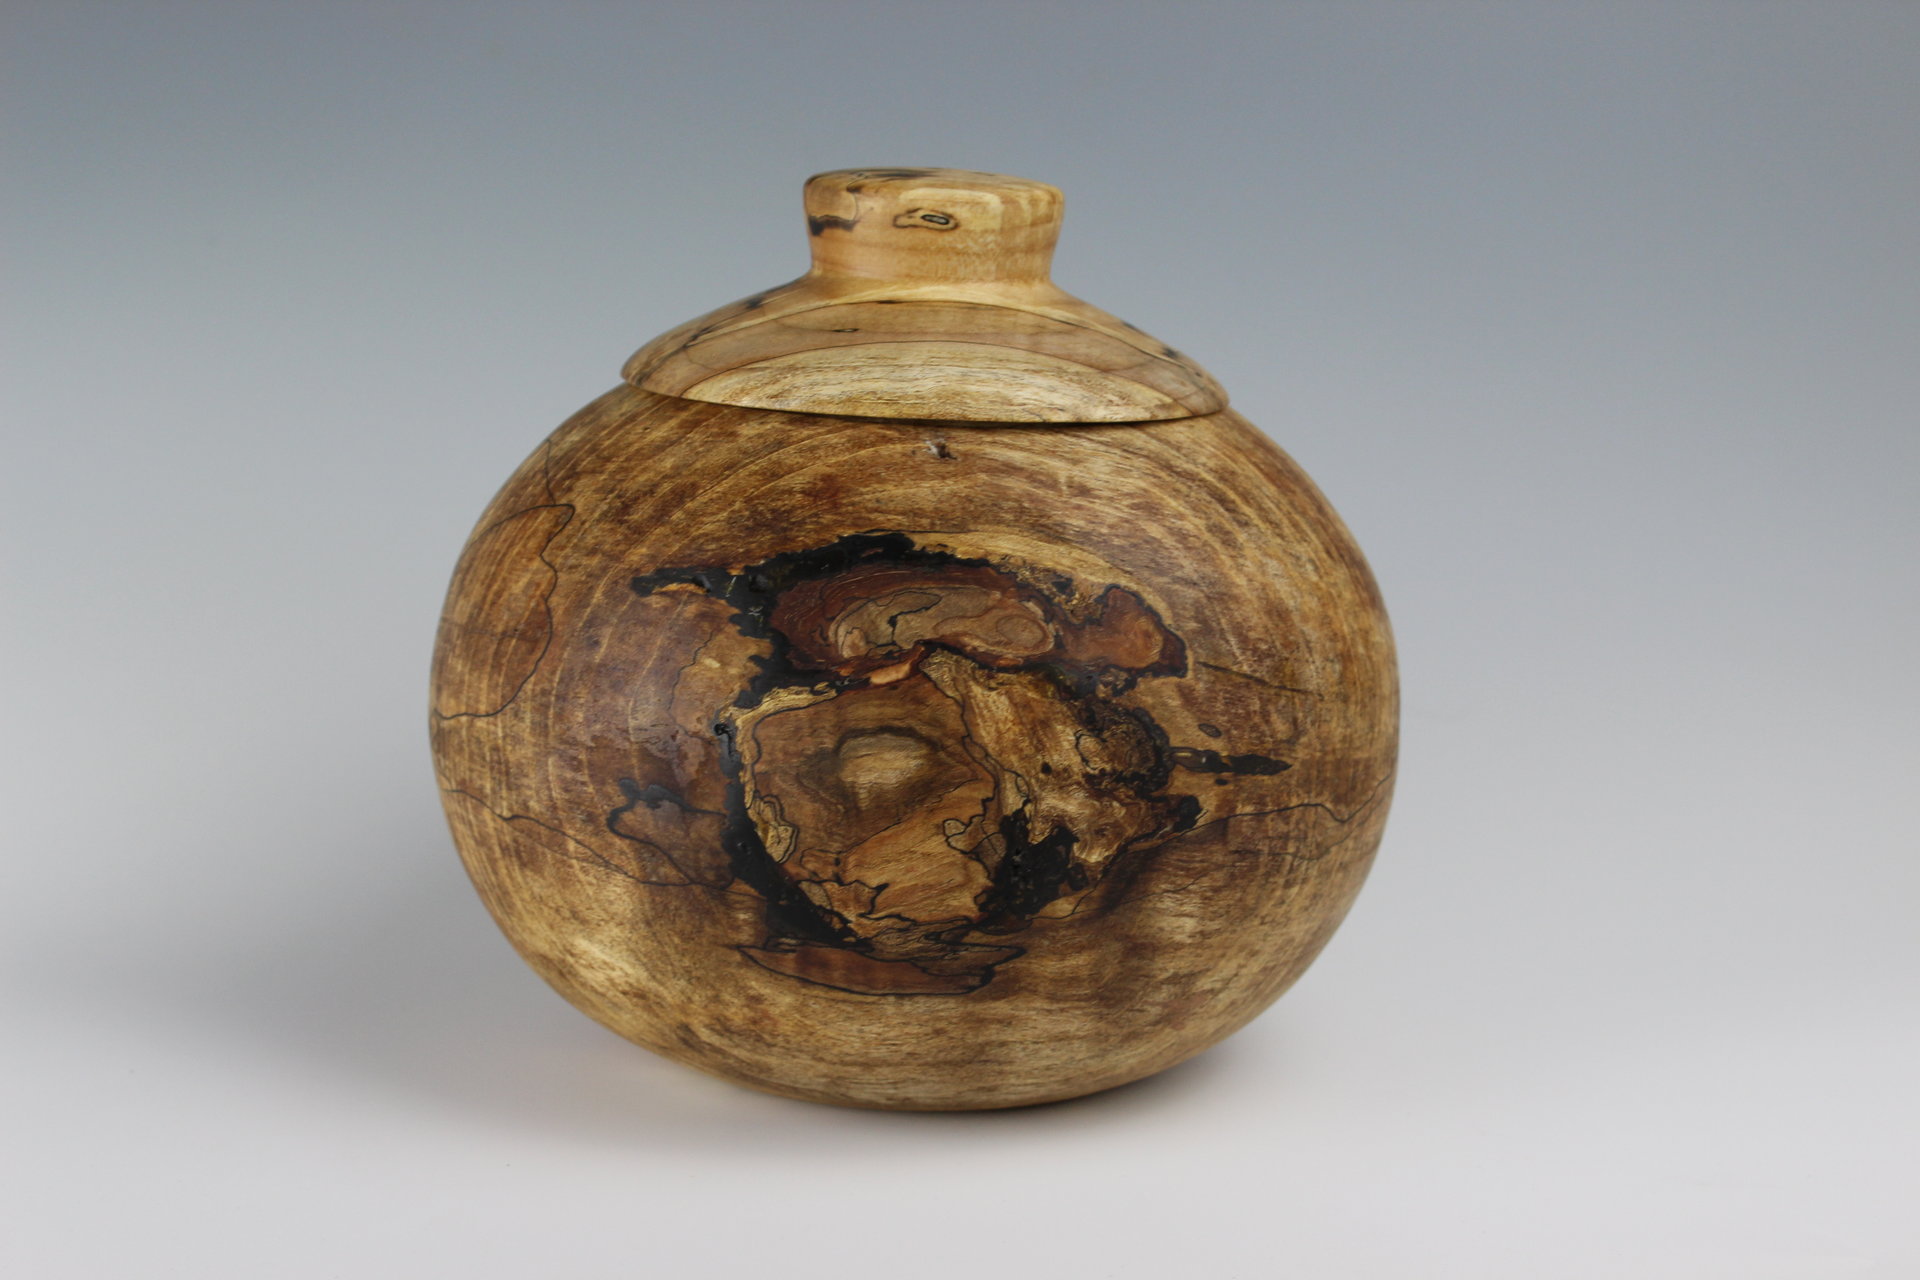 Hollow Form with Lid (second view)